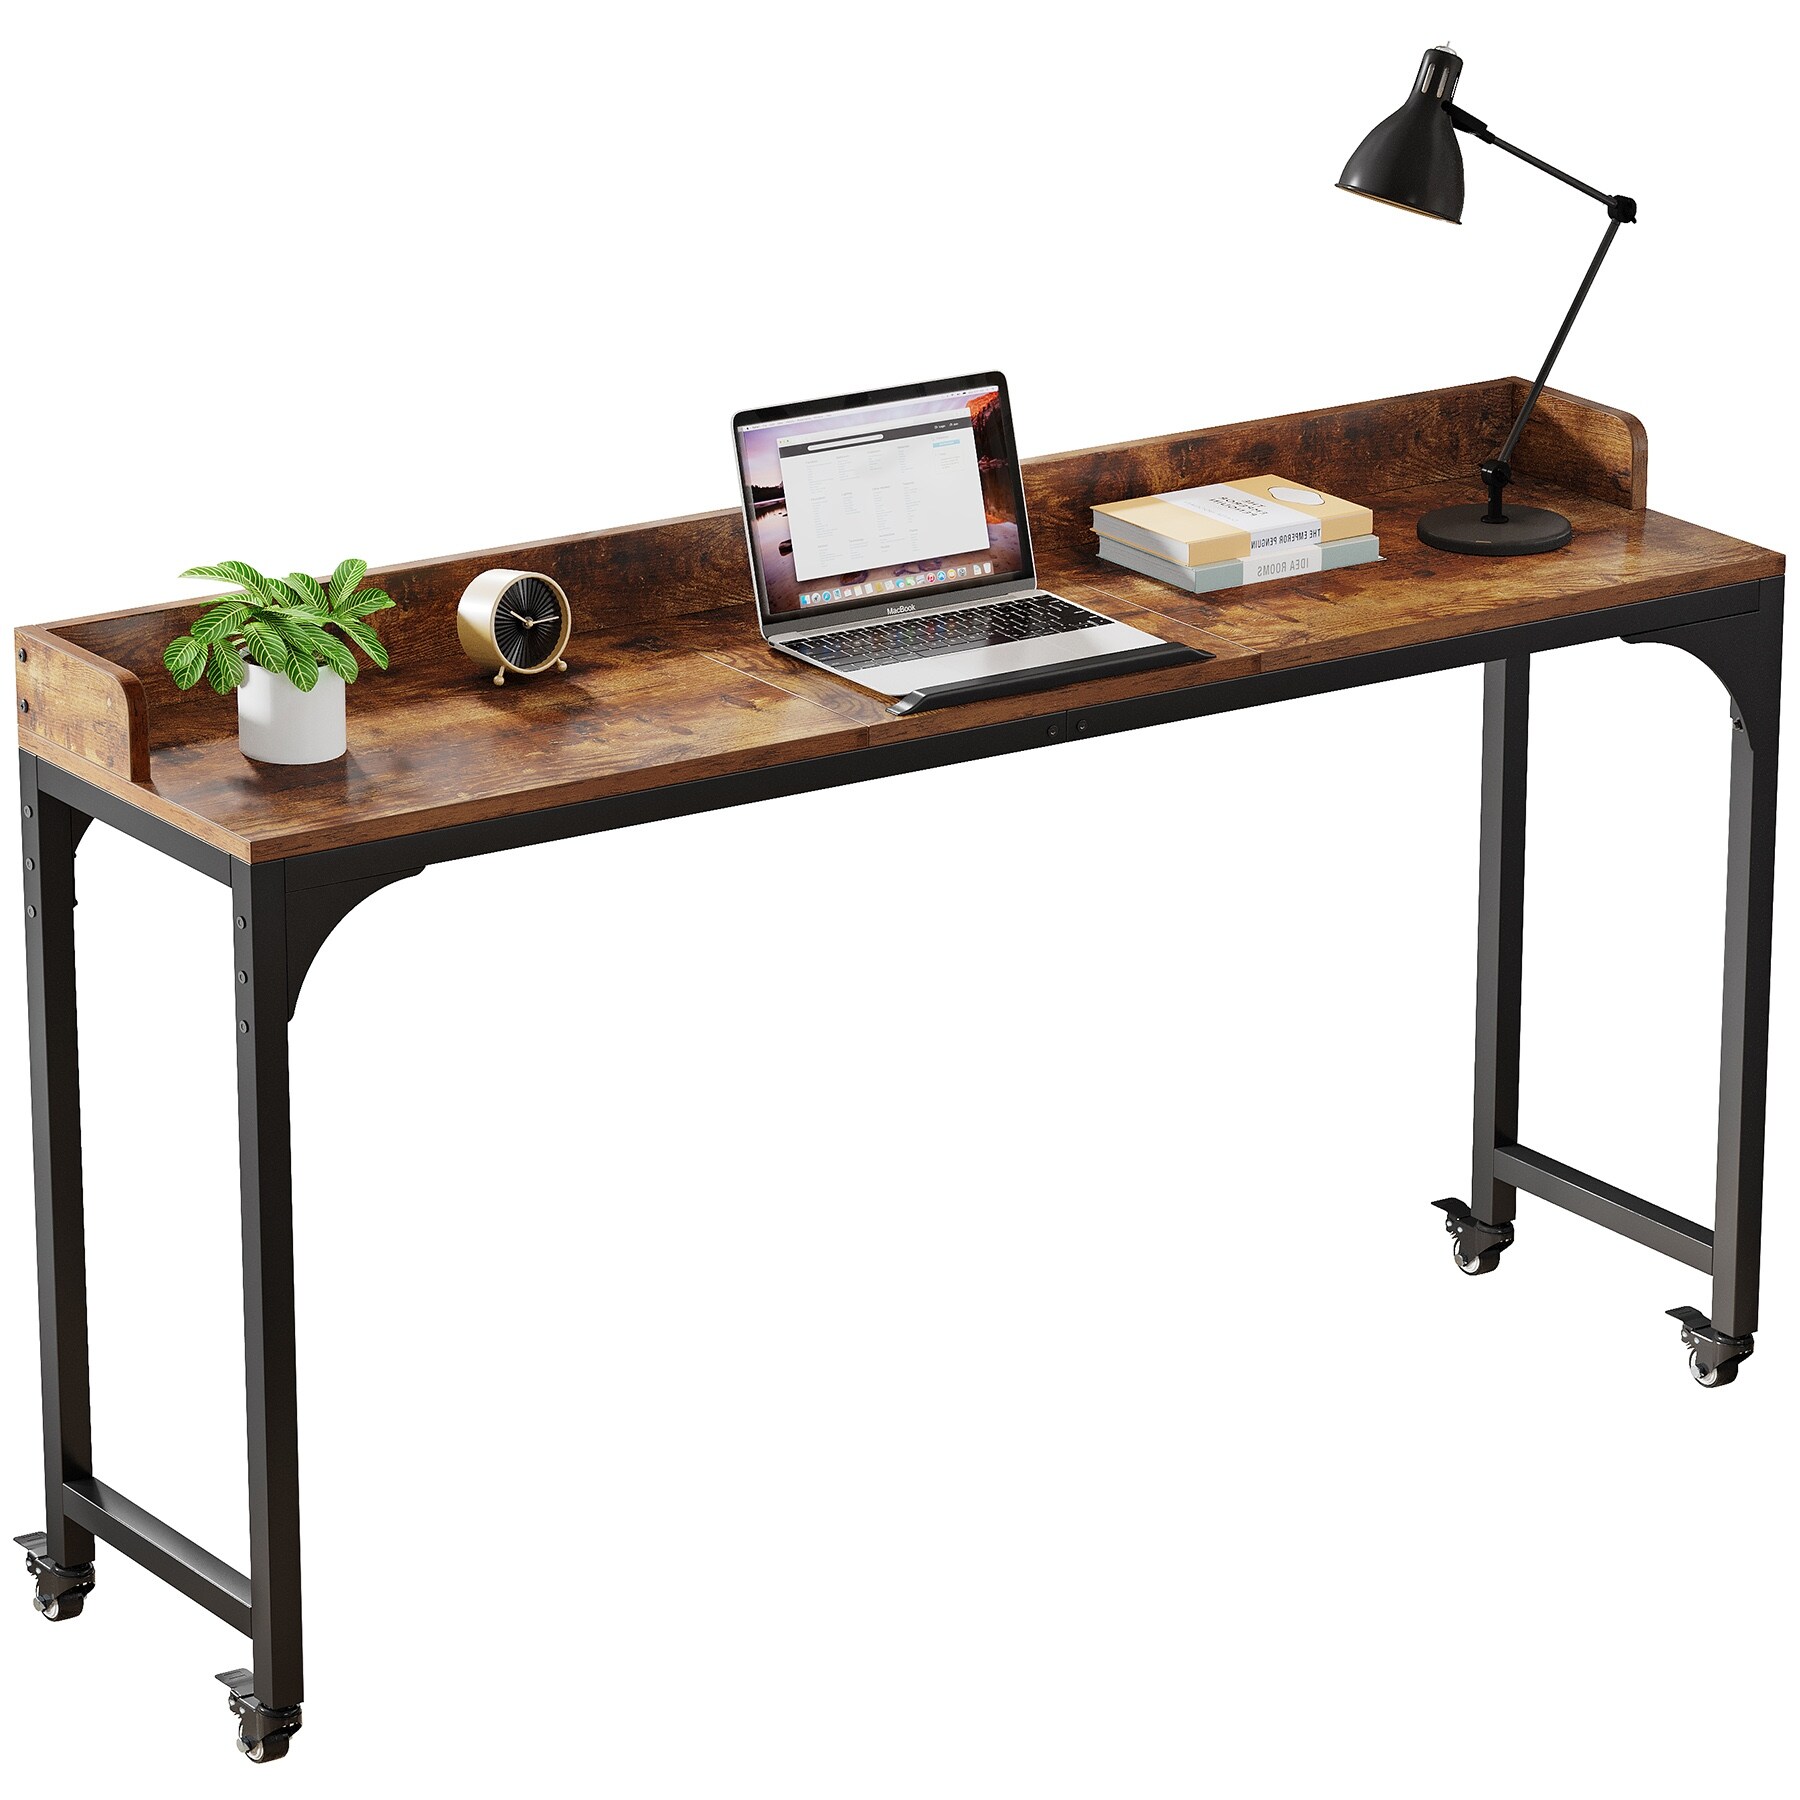 https://ak1.ostkcdn.com/images/products/is/images/direct/c332e1867d93bd84c021dc82db755fd87349ccbc/Overbed-Table-with-Wheels%2C-Mobile-Computer-Desk-Standing-Workstation-Laptop-Cart.jpg